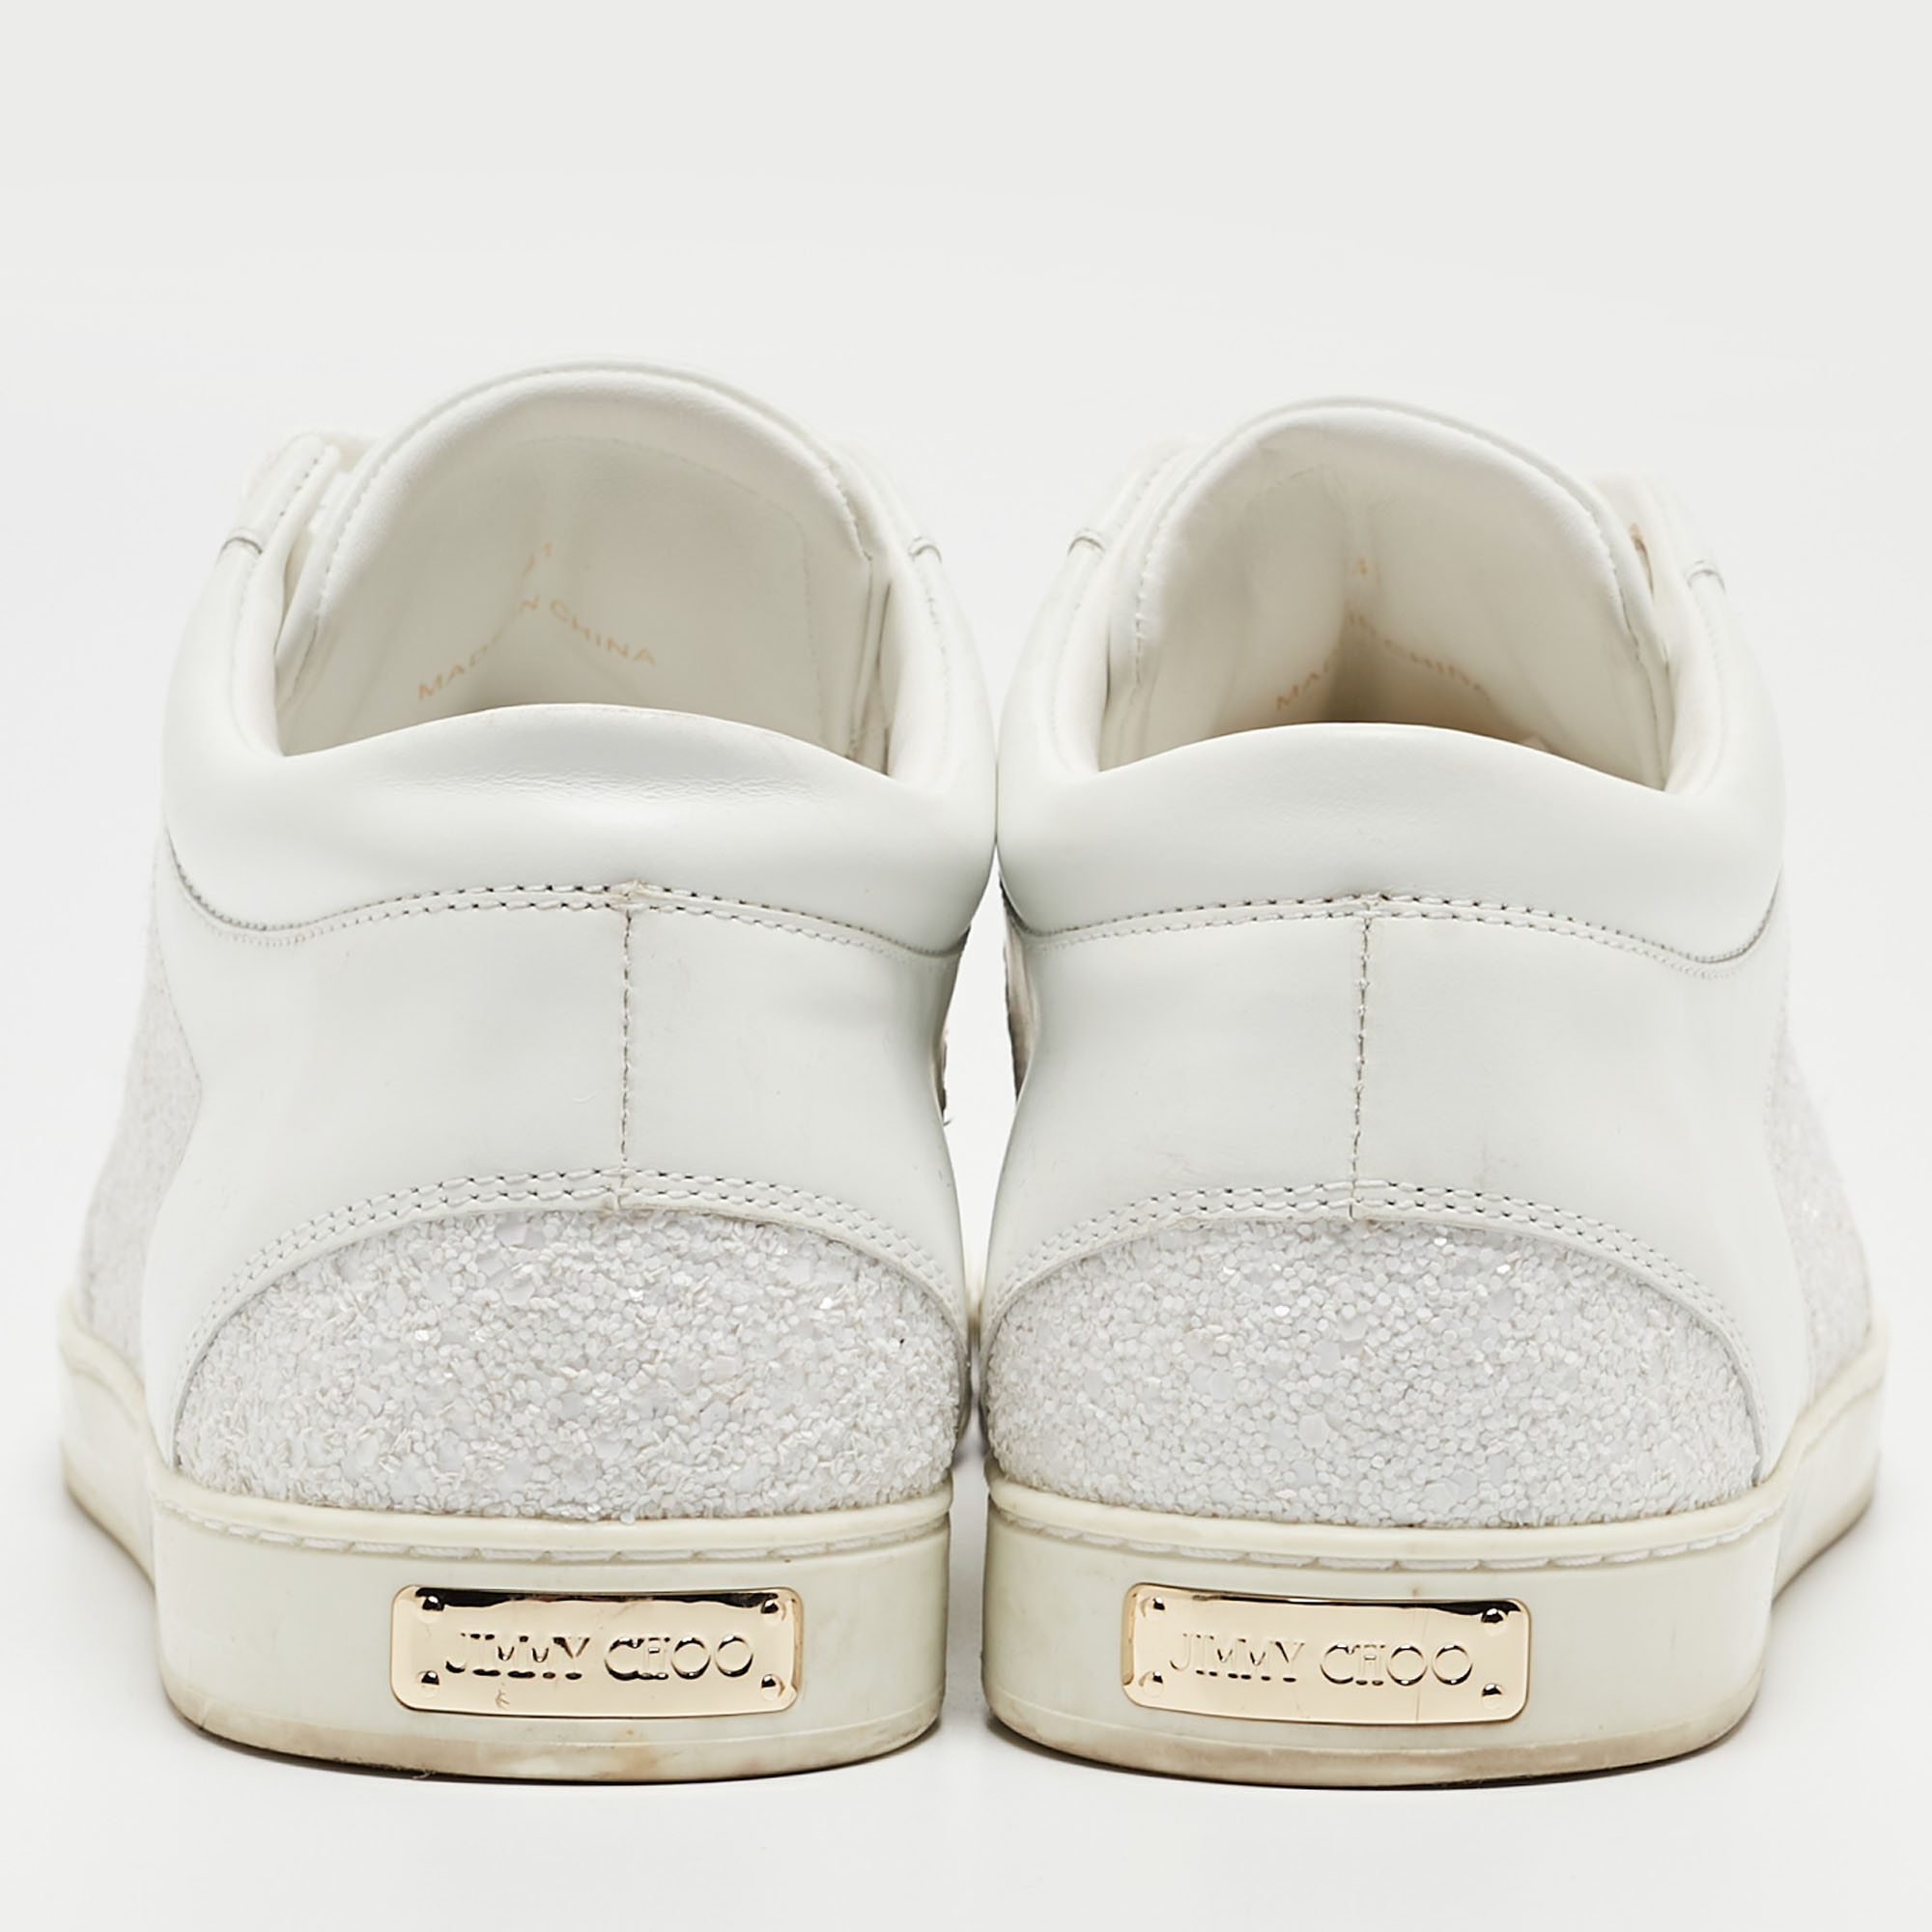 Jimmy Choo White Glitter And Leather Low Top Sneakers Size 41